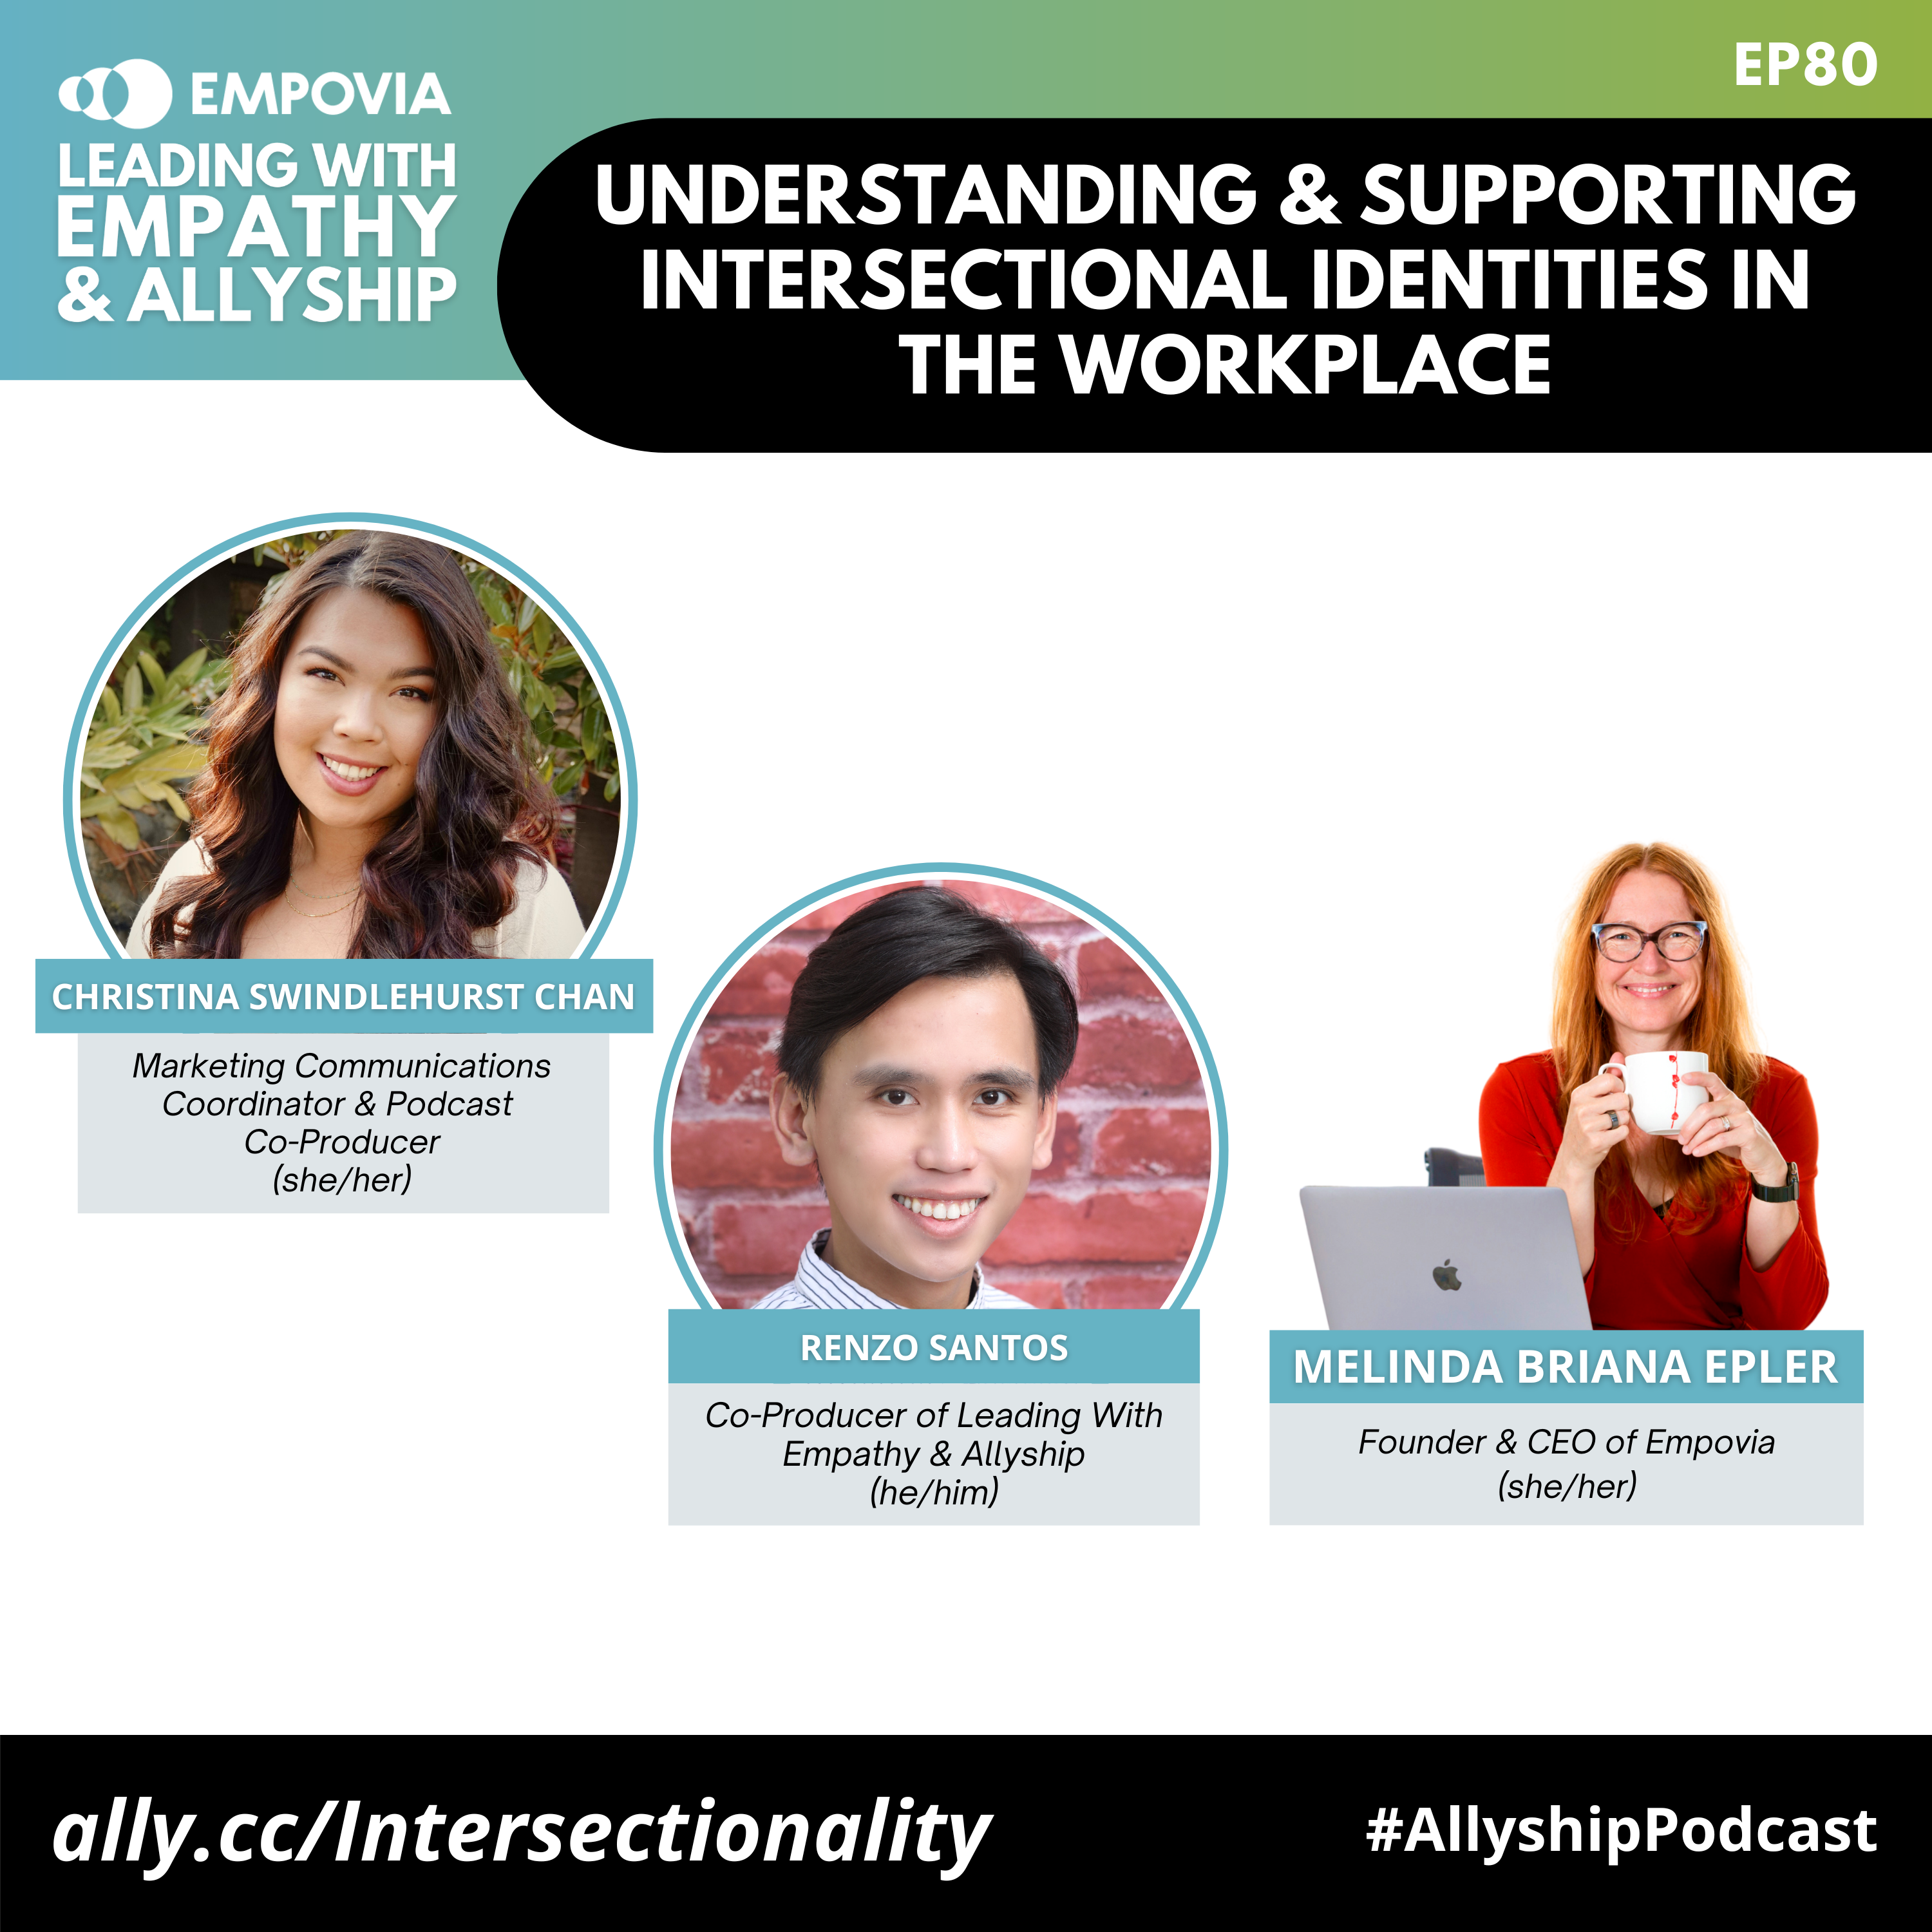 Leading With Empathy & Allyship promo with the Empovia logo and photos of Christina Swindlehurst Chan, an Asian-White biracial woman with long wavy brown hair wearing an olive green dress with a beige cardigan; Renzo Santos, a Filipino man with black hair and white/gray striped button-down shirt; and host Melinda Briana Epler, a White woman with red hair, glasses, and orange shirt holding a white mug behind a laptop.